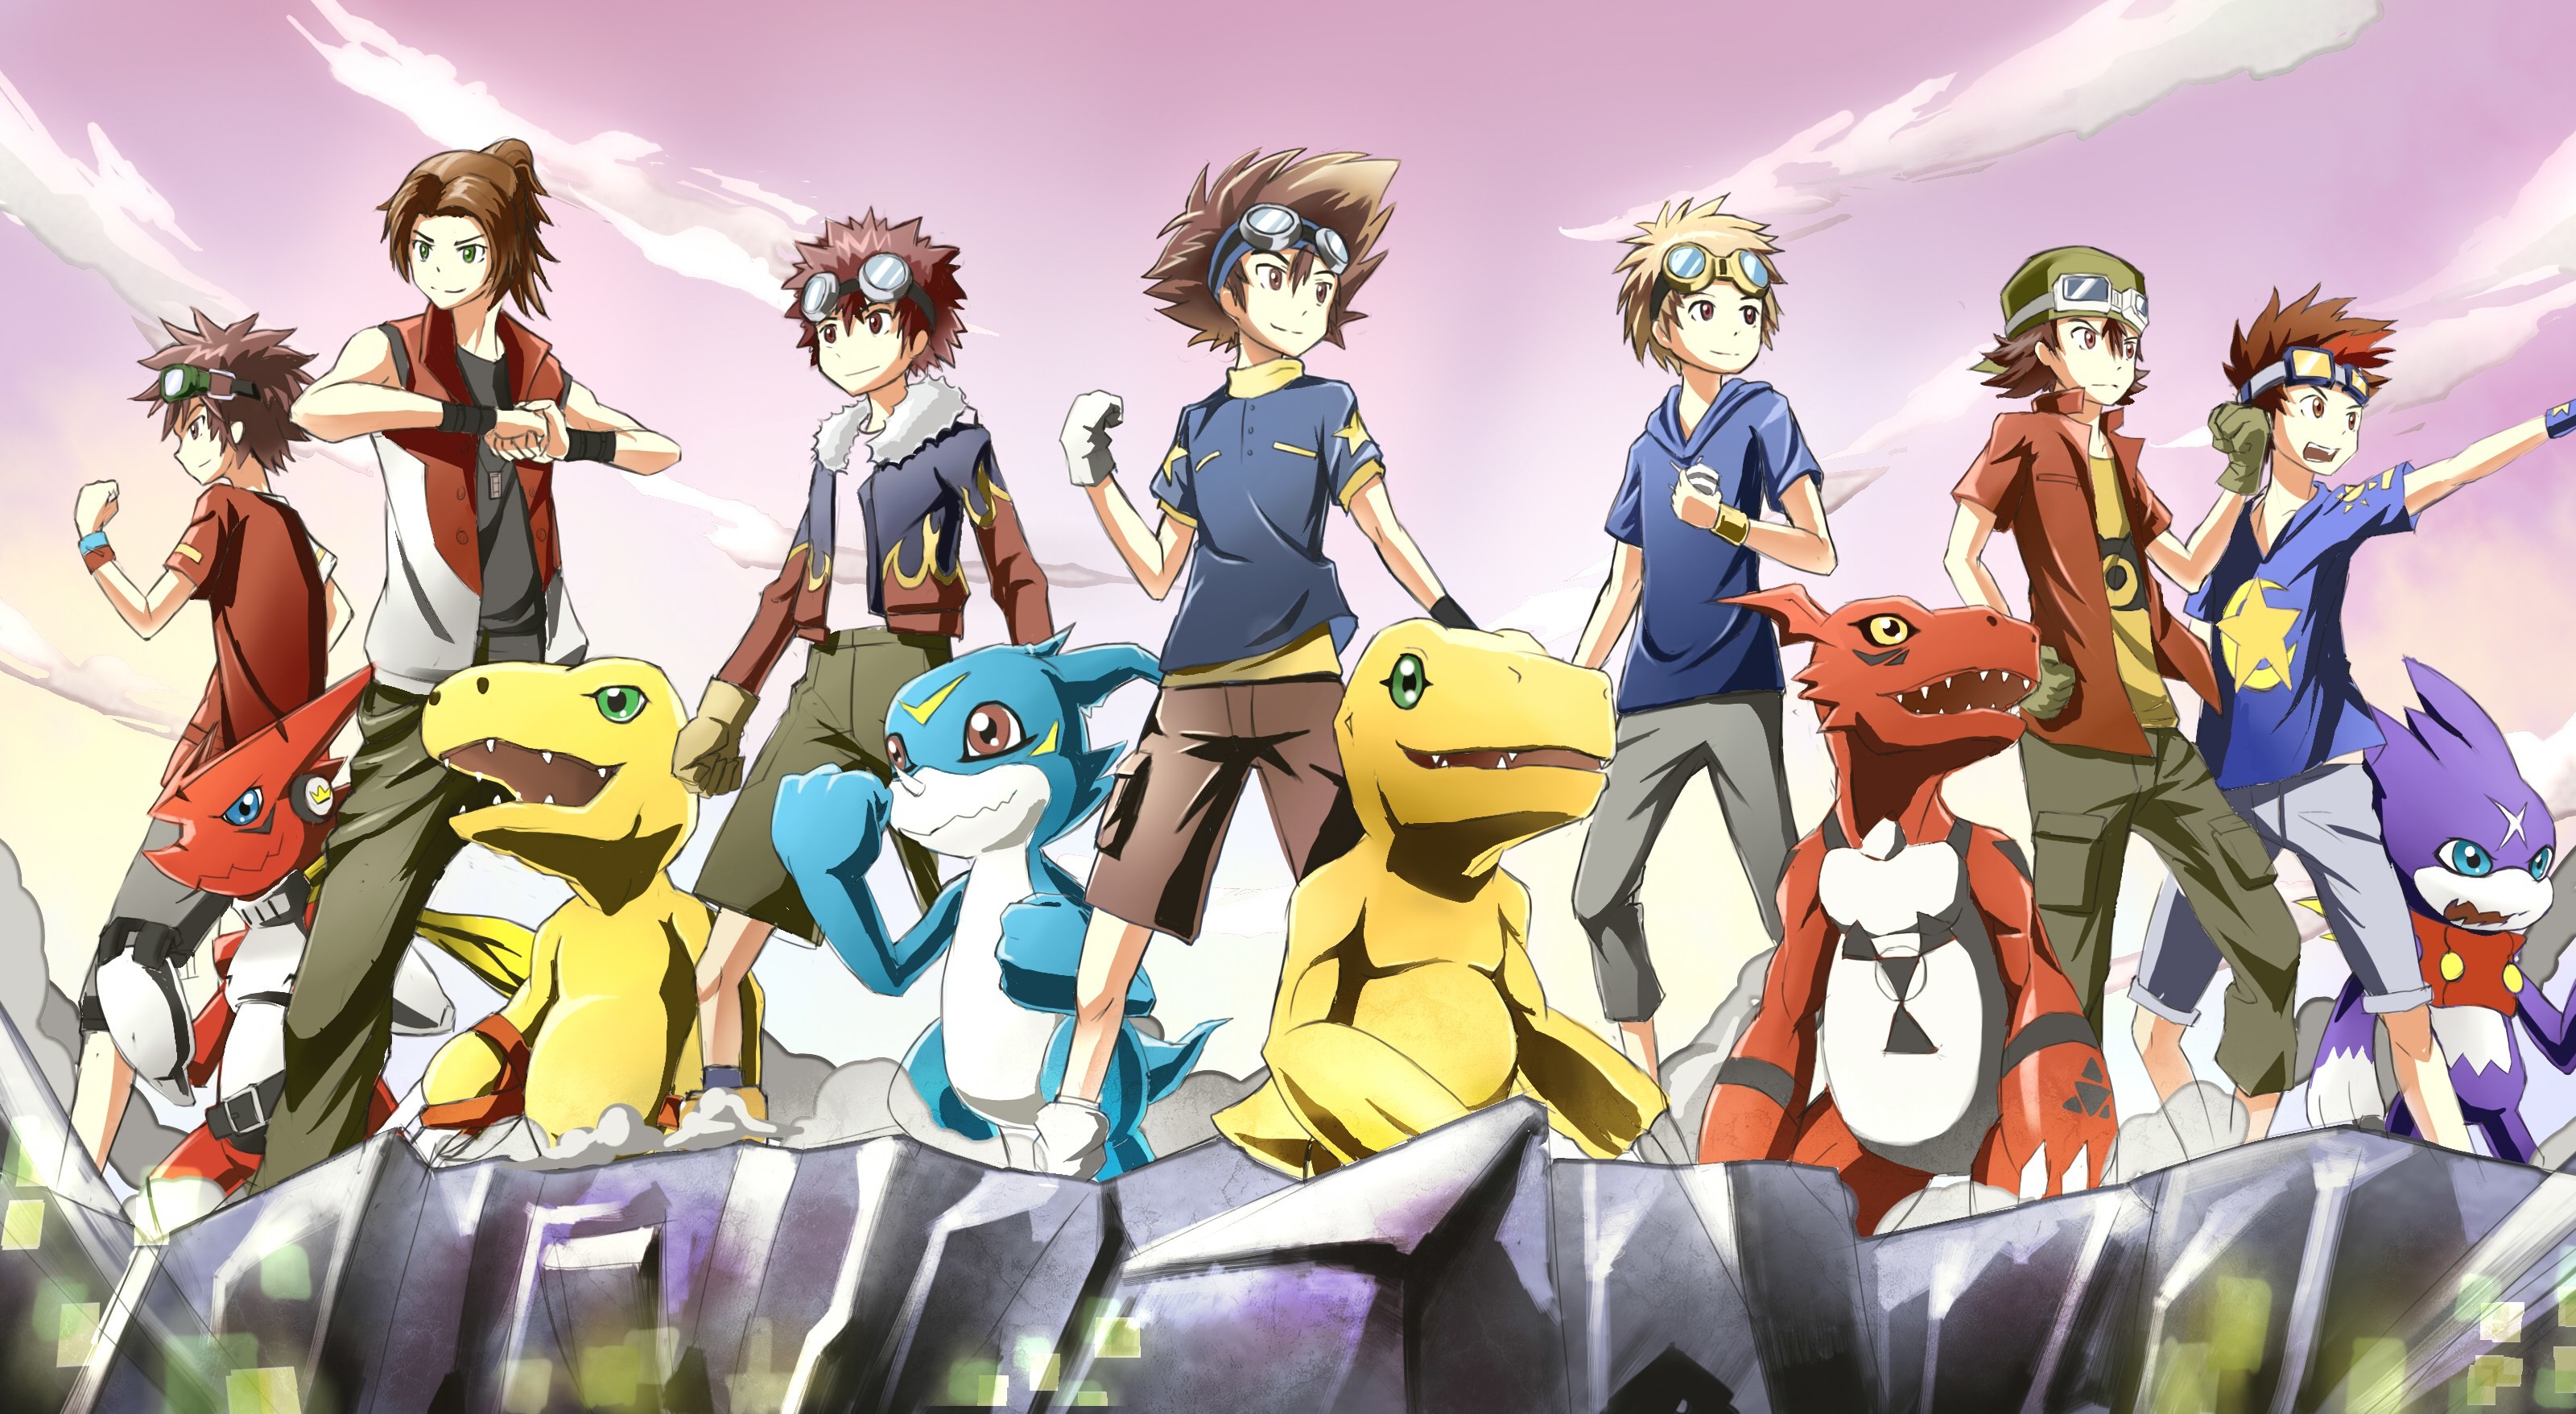 3200x1756 Digimon: Digital Monsters is a classic anime series about kids that meet  Digimon partners and fight together to defeat evil. Premiering in Japan  during the ...